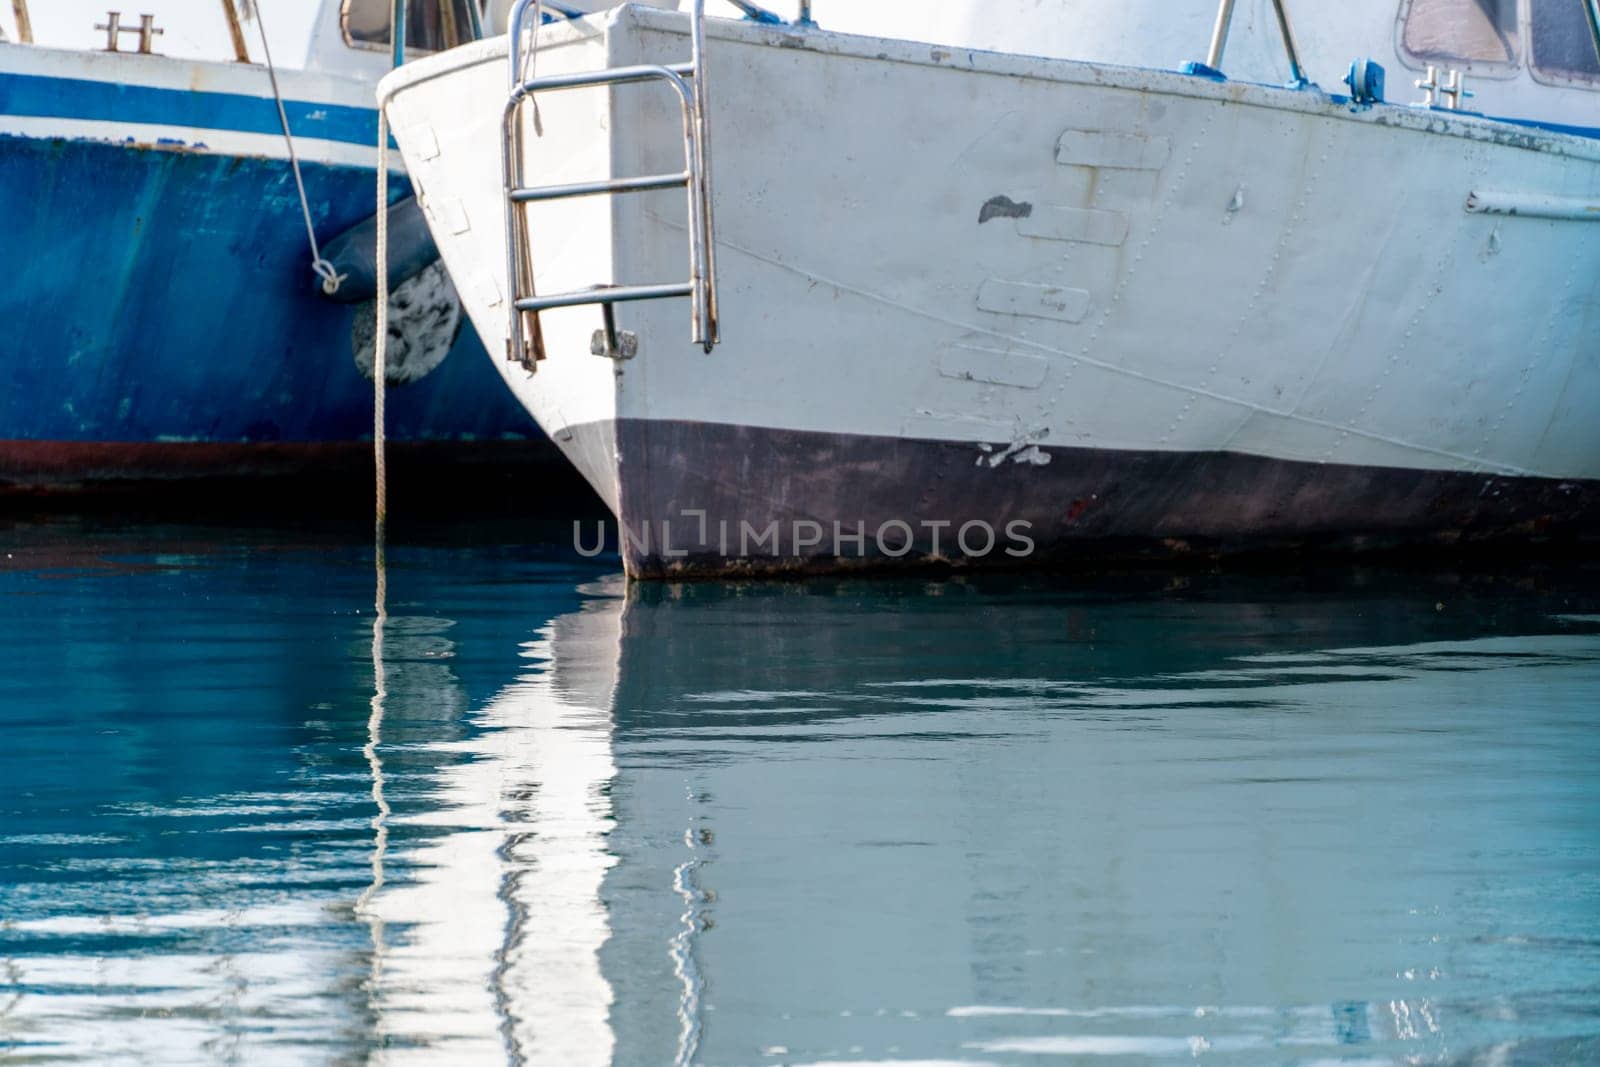 Reflection in the sea surface of white yachts parked in the port on the shore. Fragment of a ship on the water and the reflection of ships in the sea. motionless mirrored water of the sea.